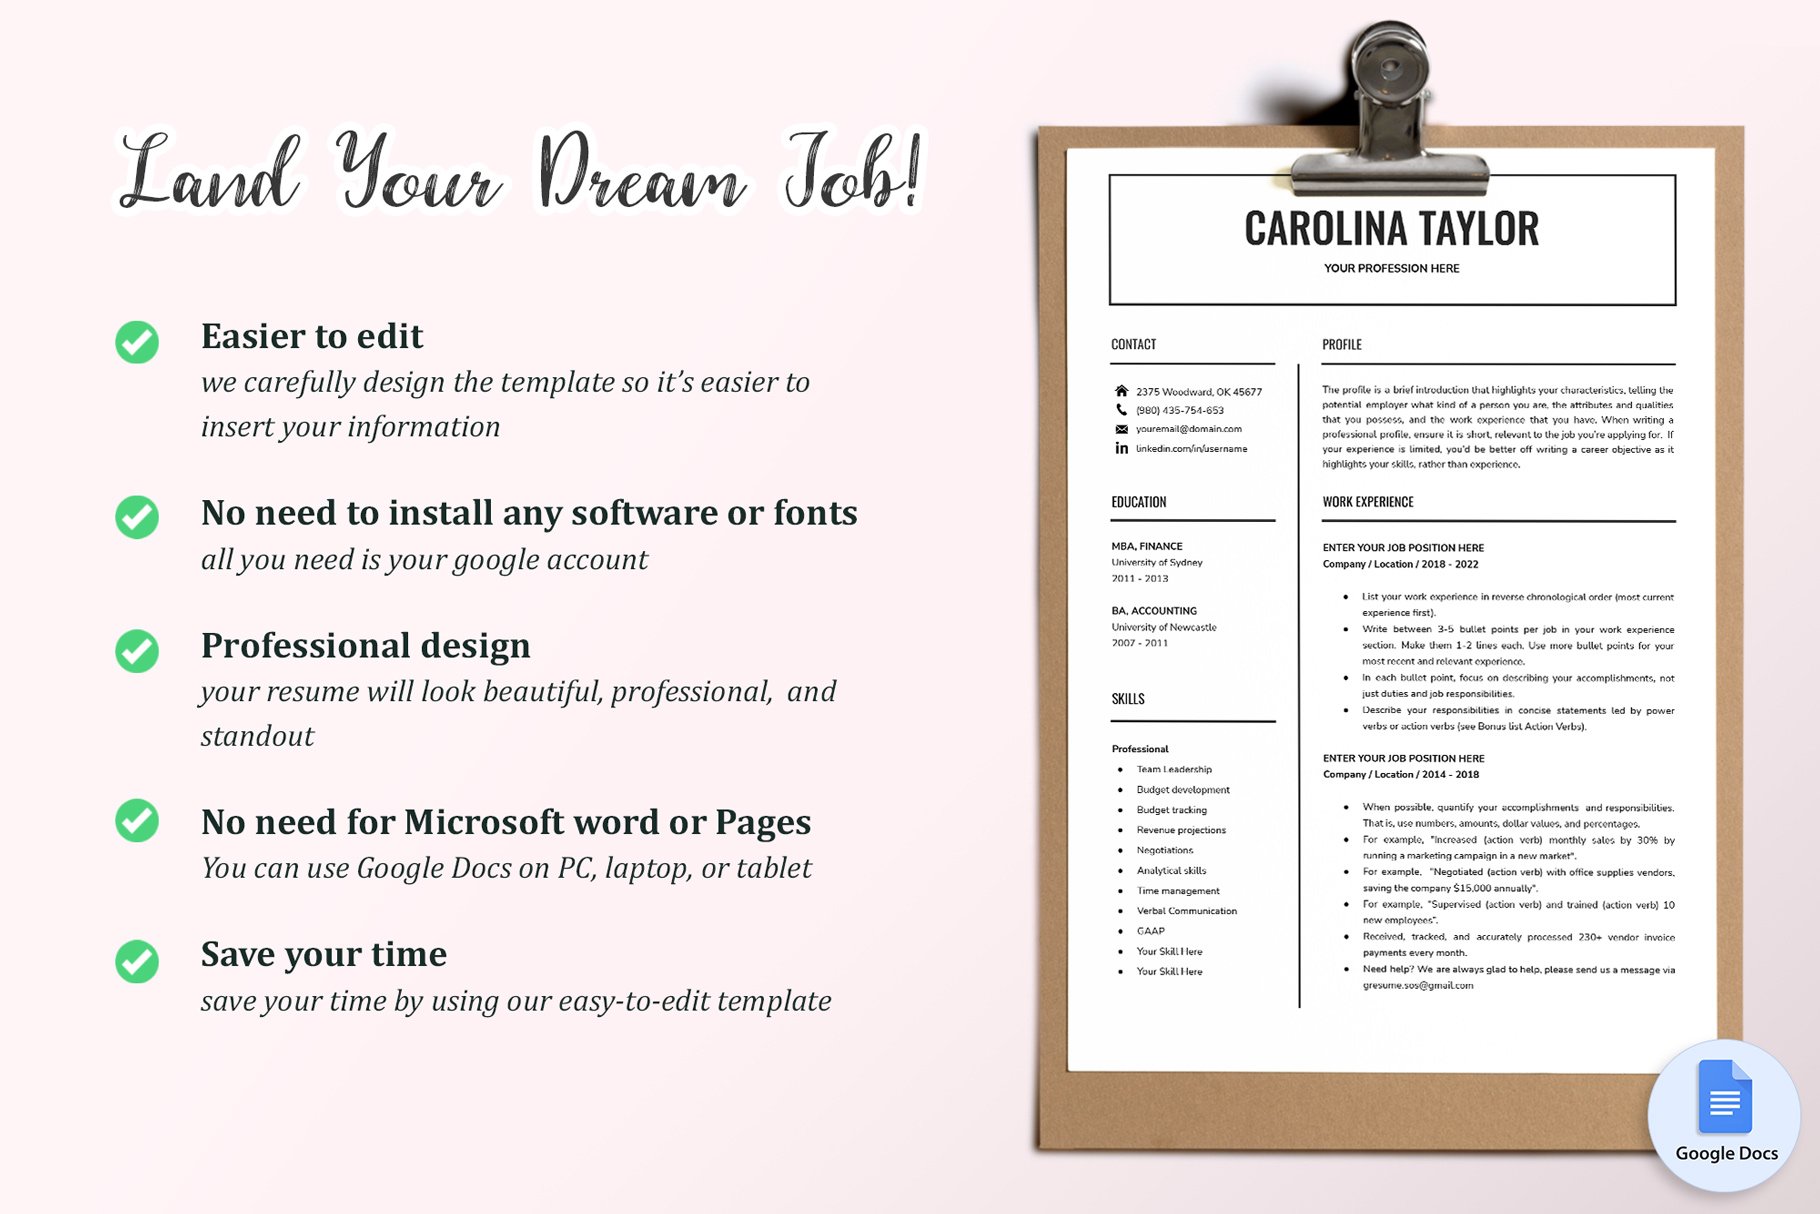 Clipboard with the words land your dream job on it.